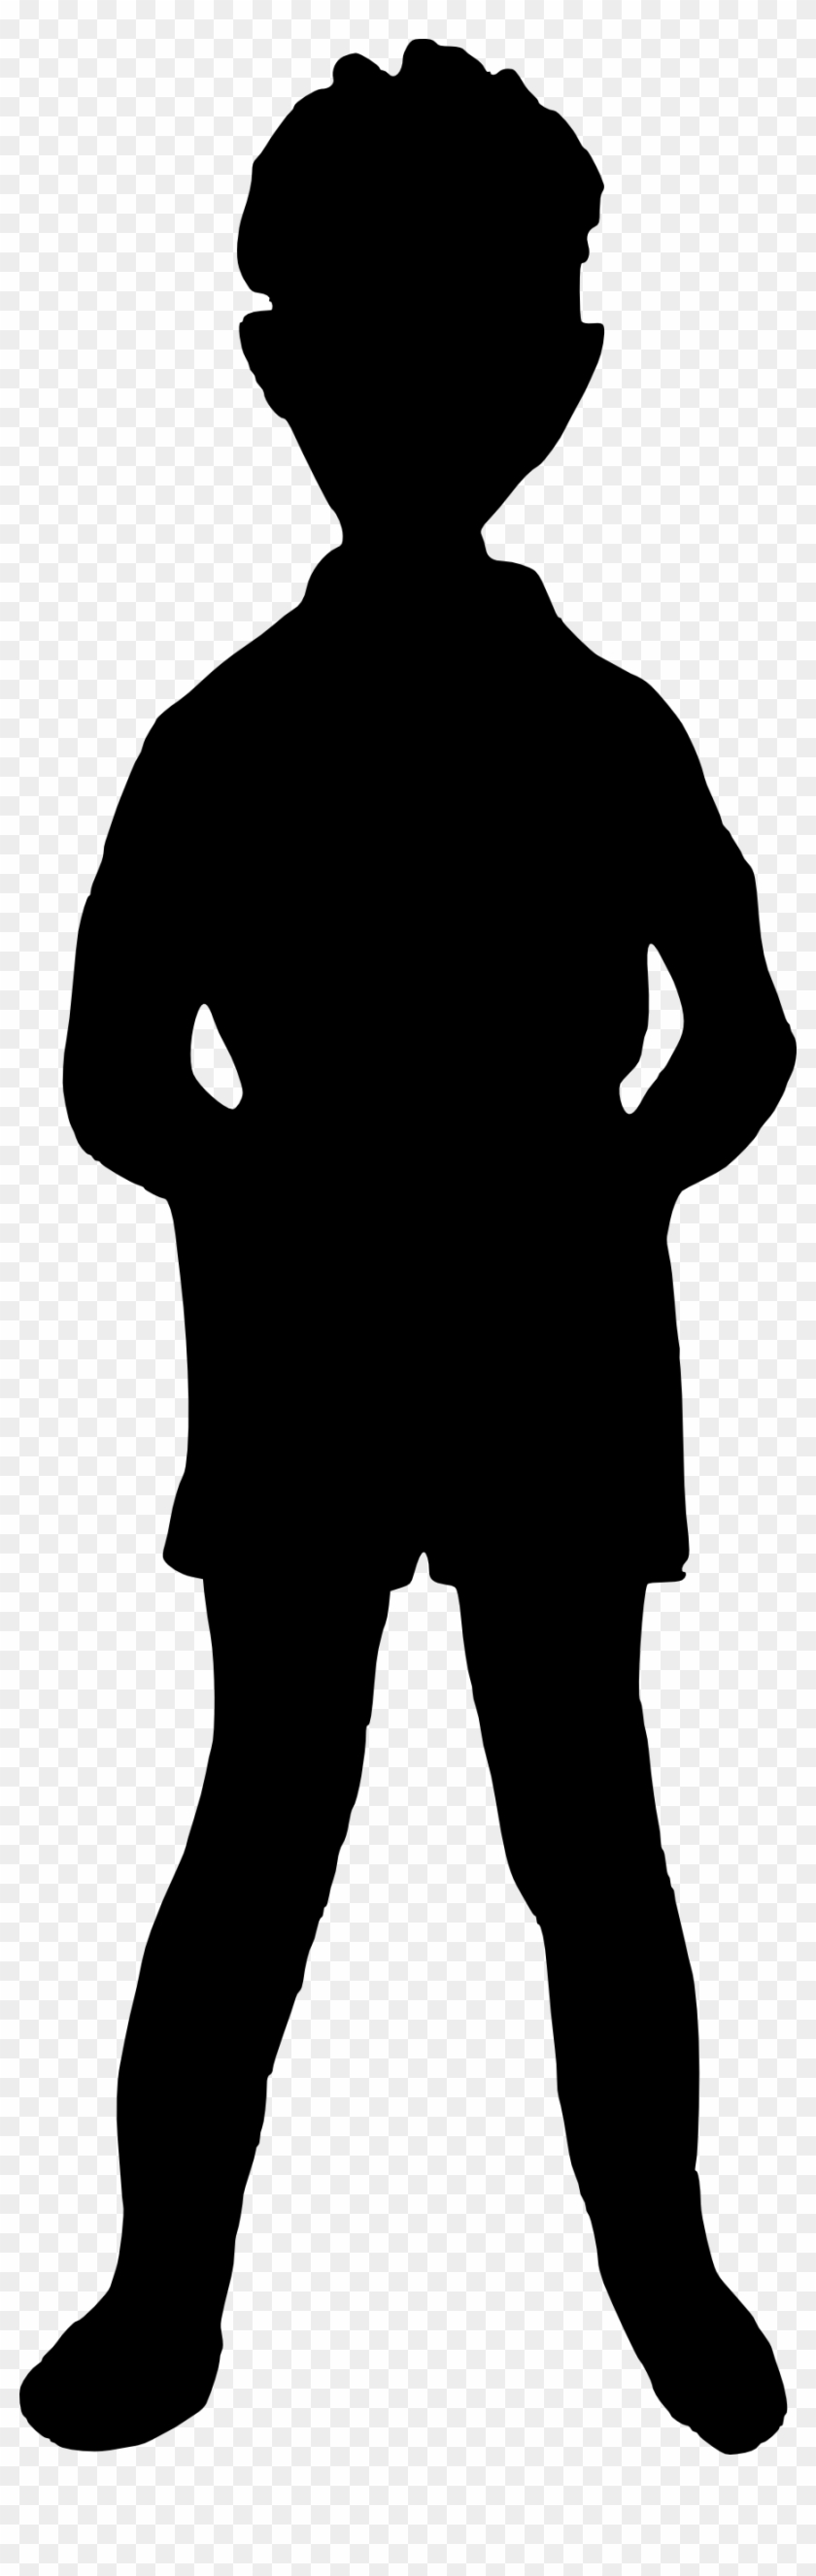 Free Download - Boy Silhouette Png #257328